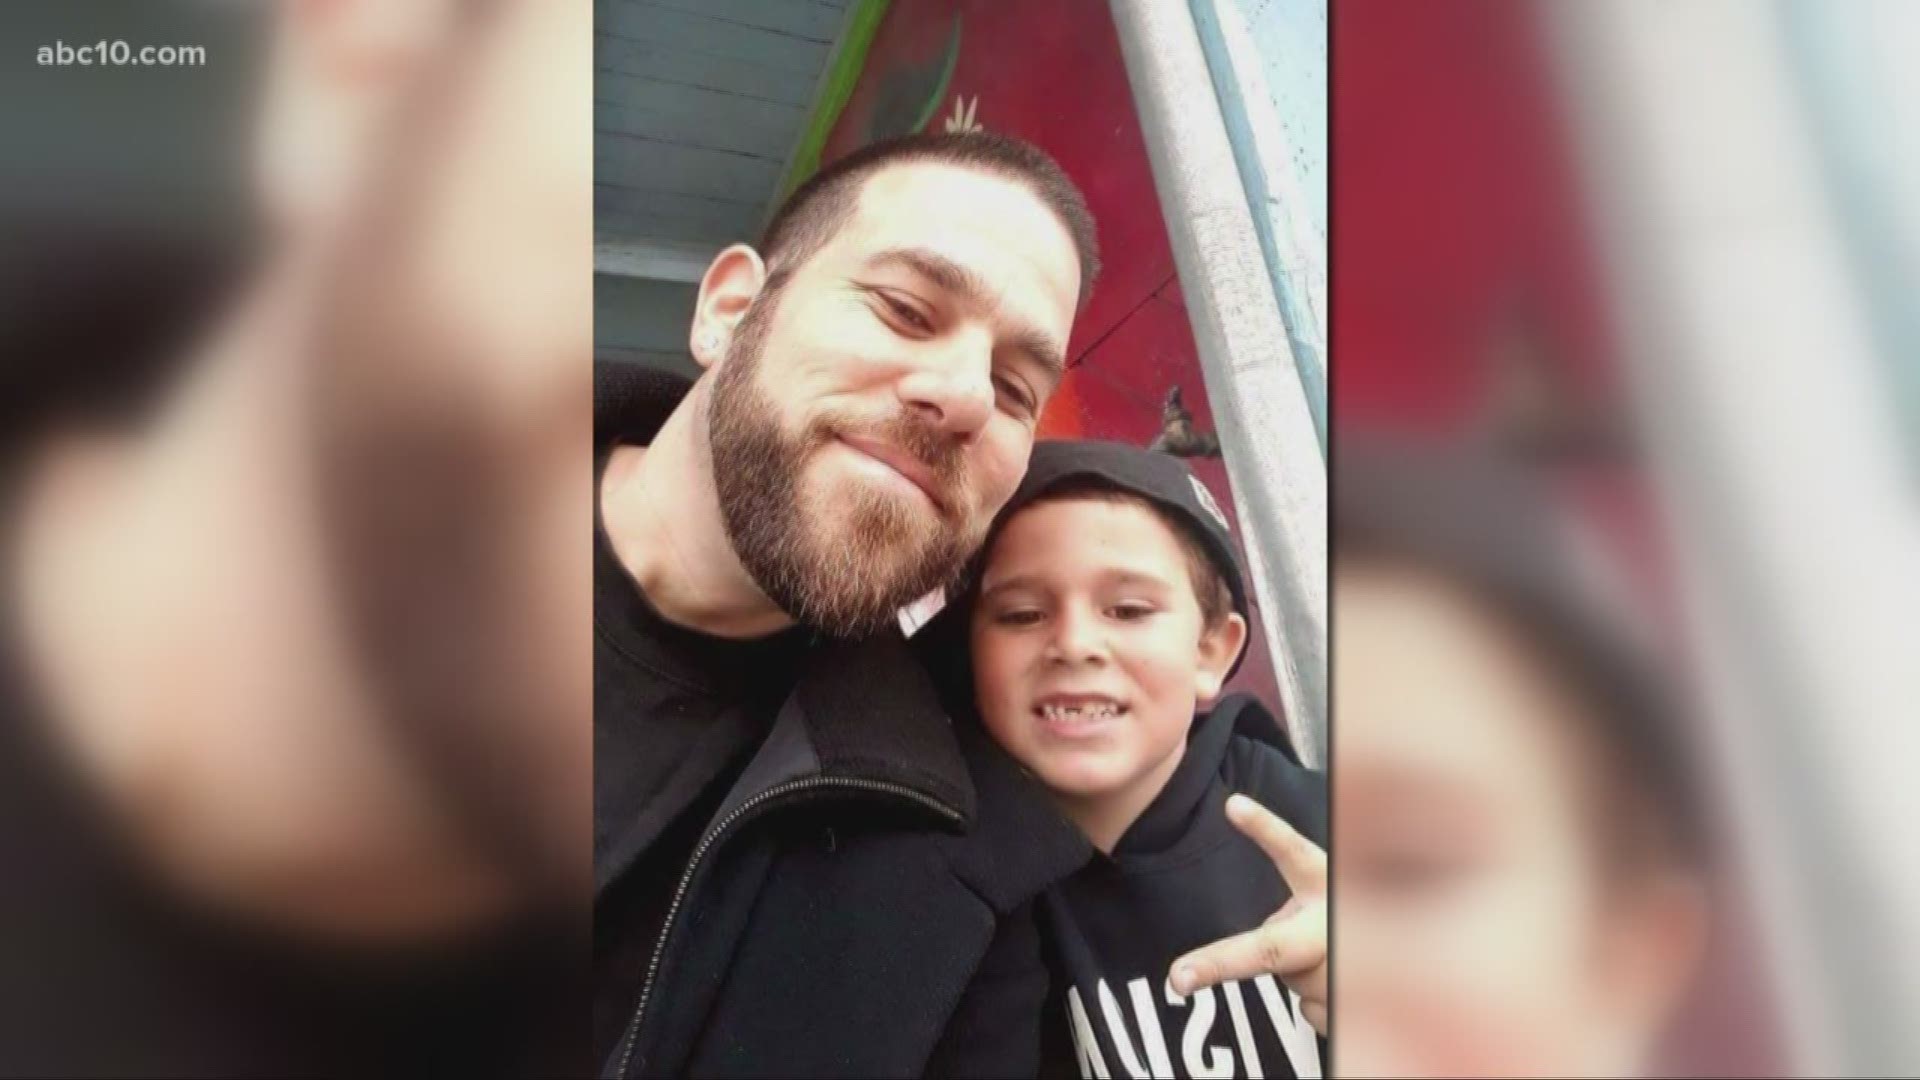 Thanks to social media, a father and son experienced their Christmas miracle.